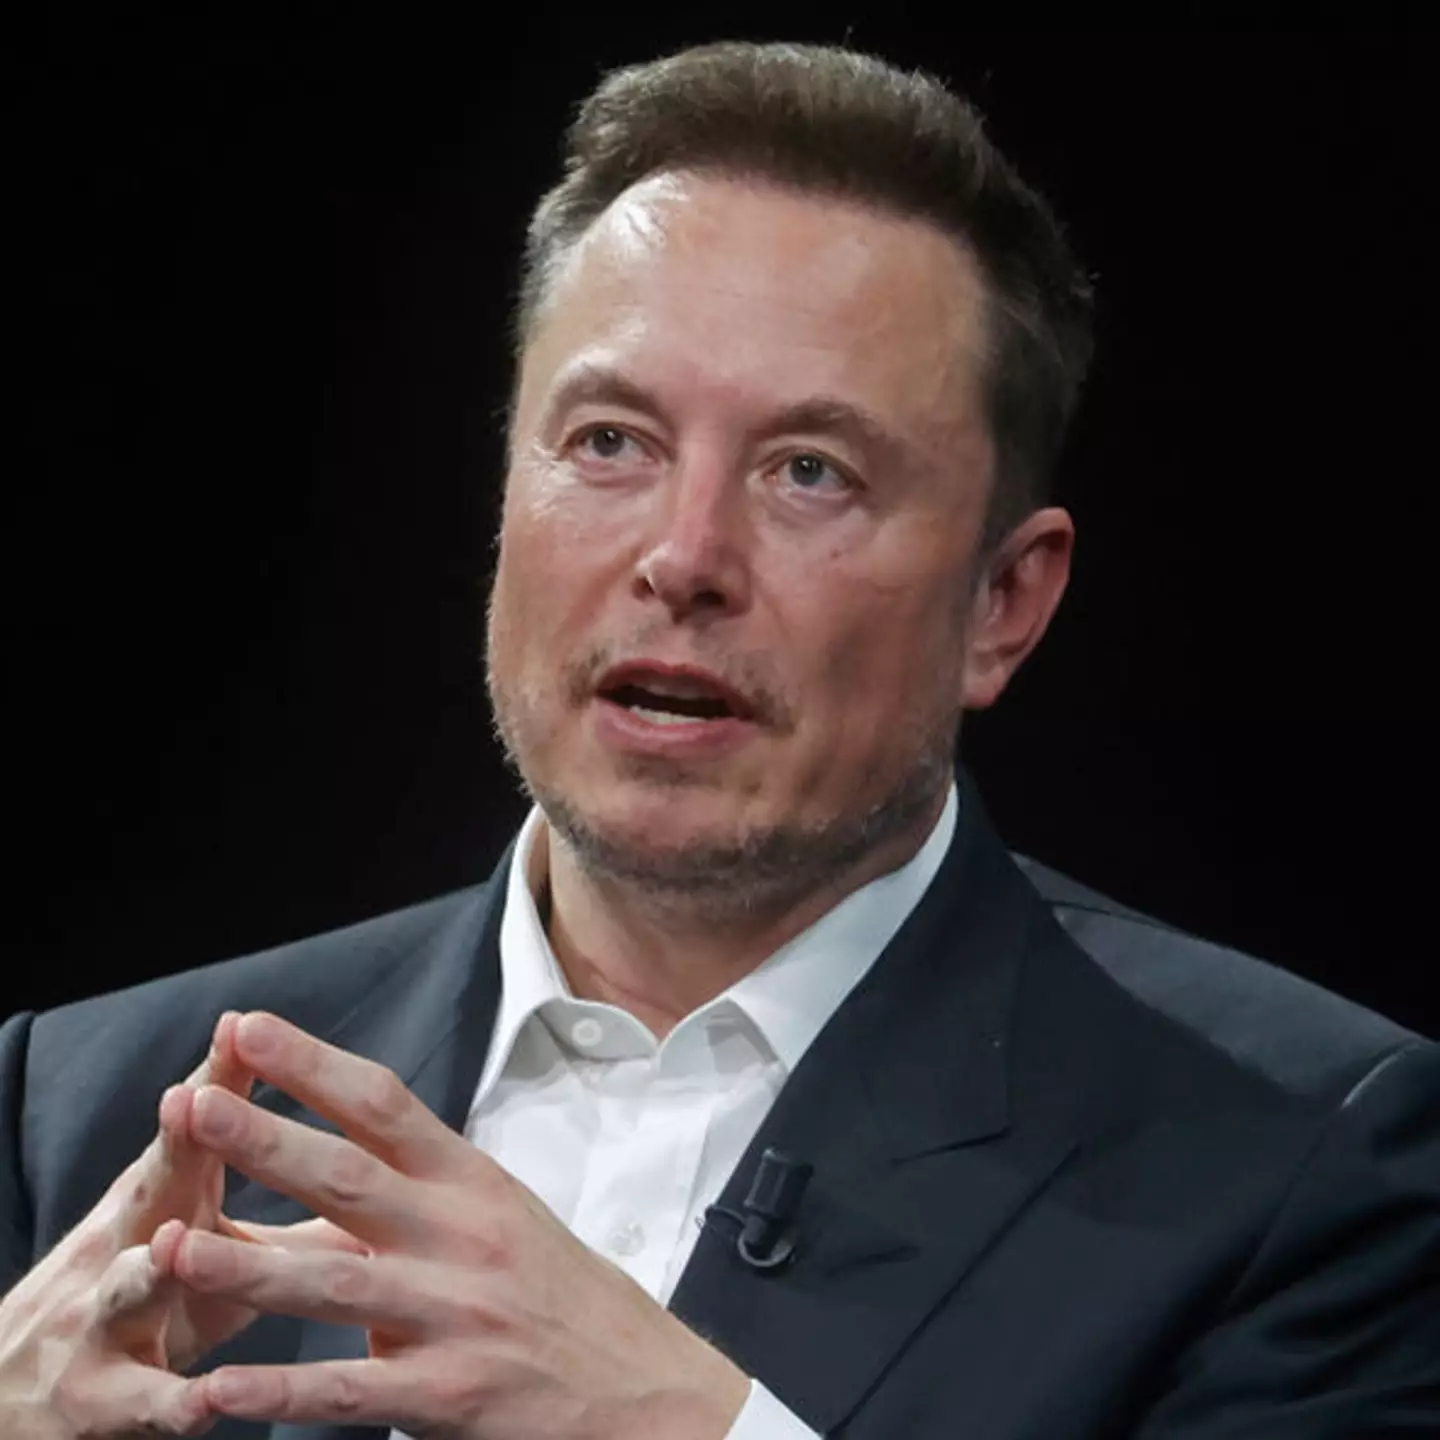 Elon Musk responds to reports of robot 'attack' on Tesla engineer